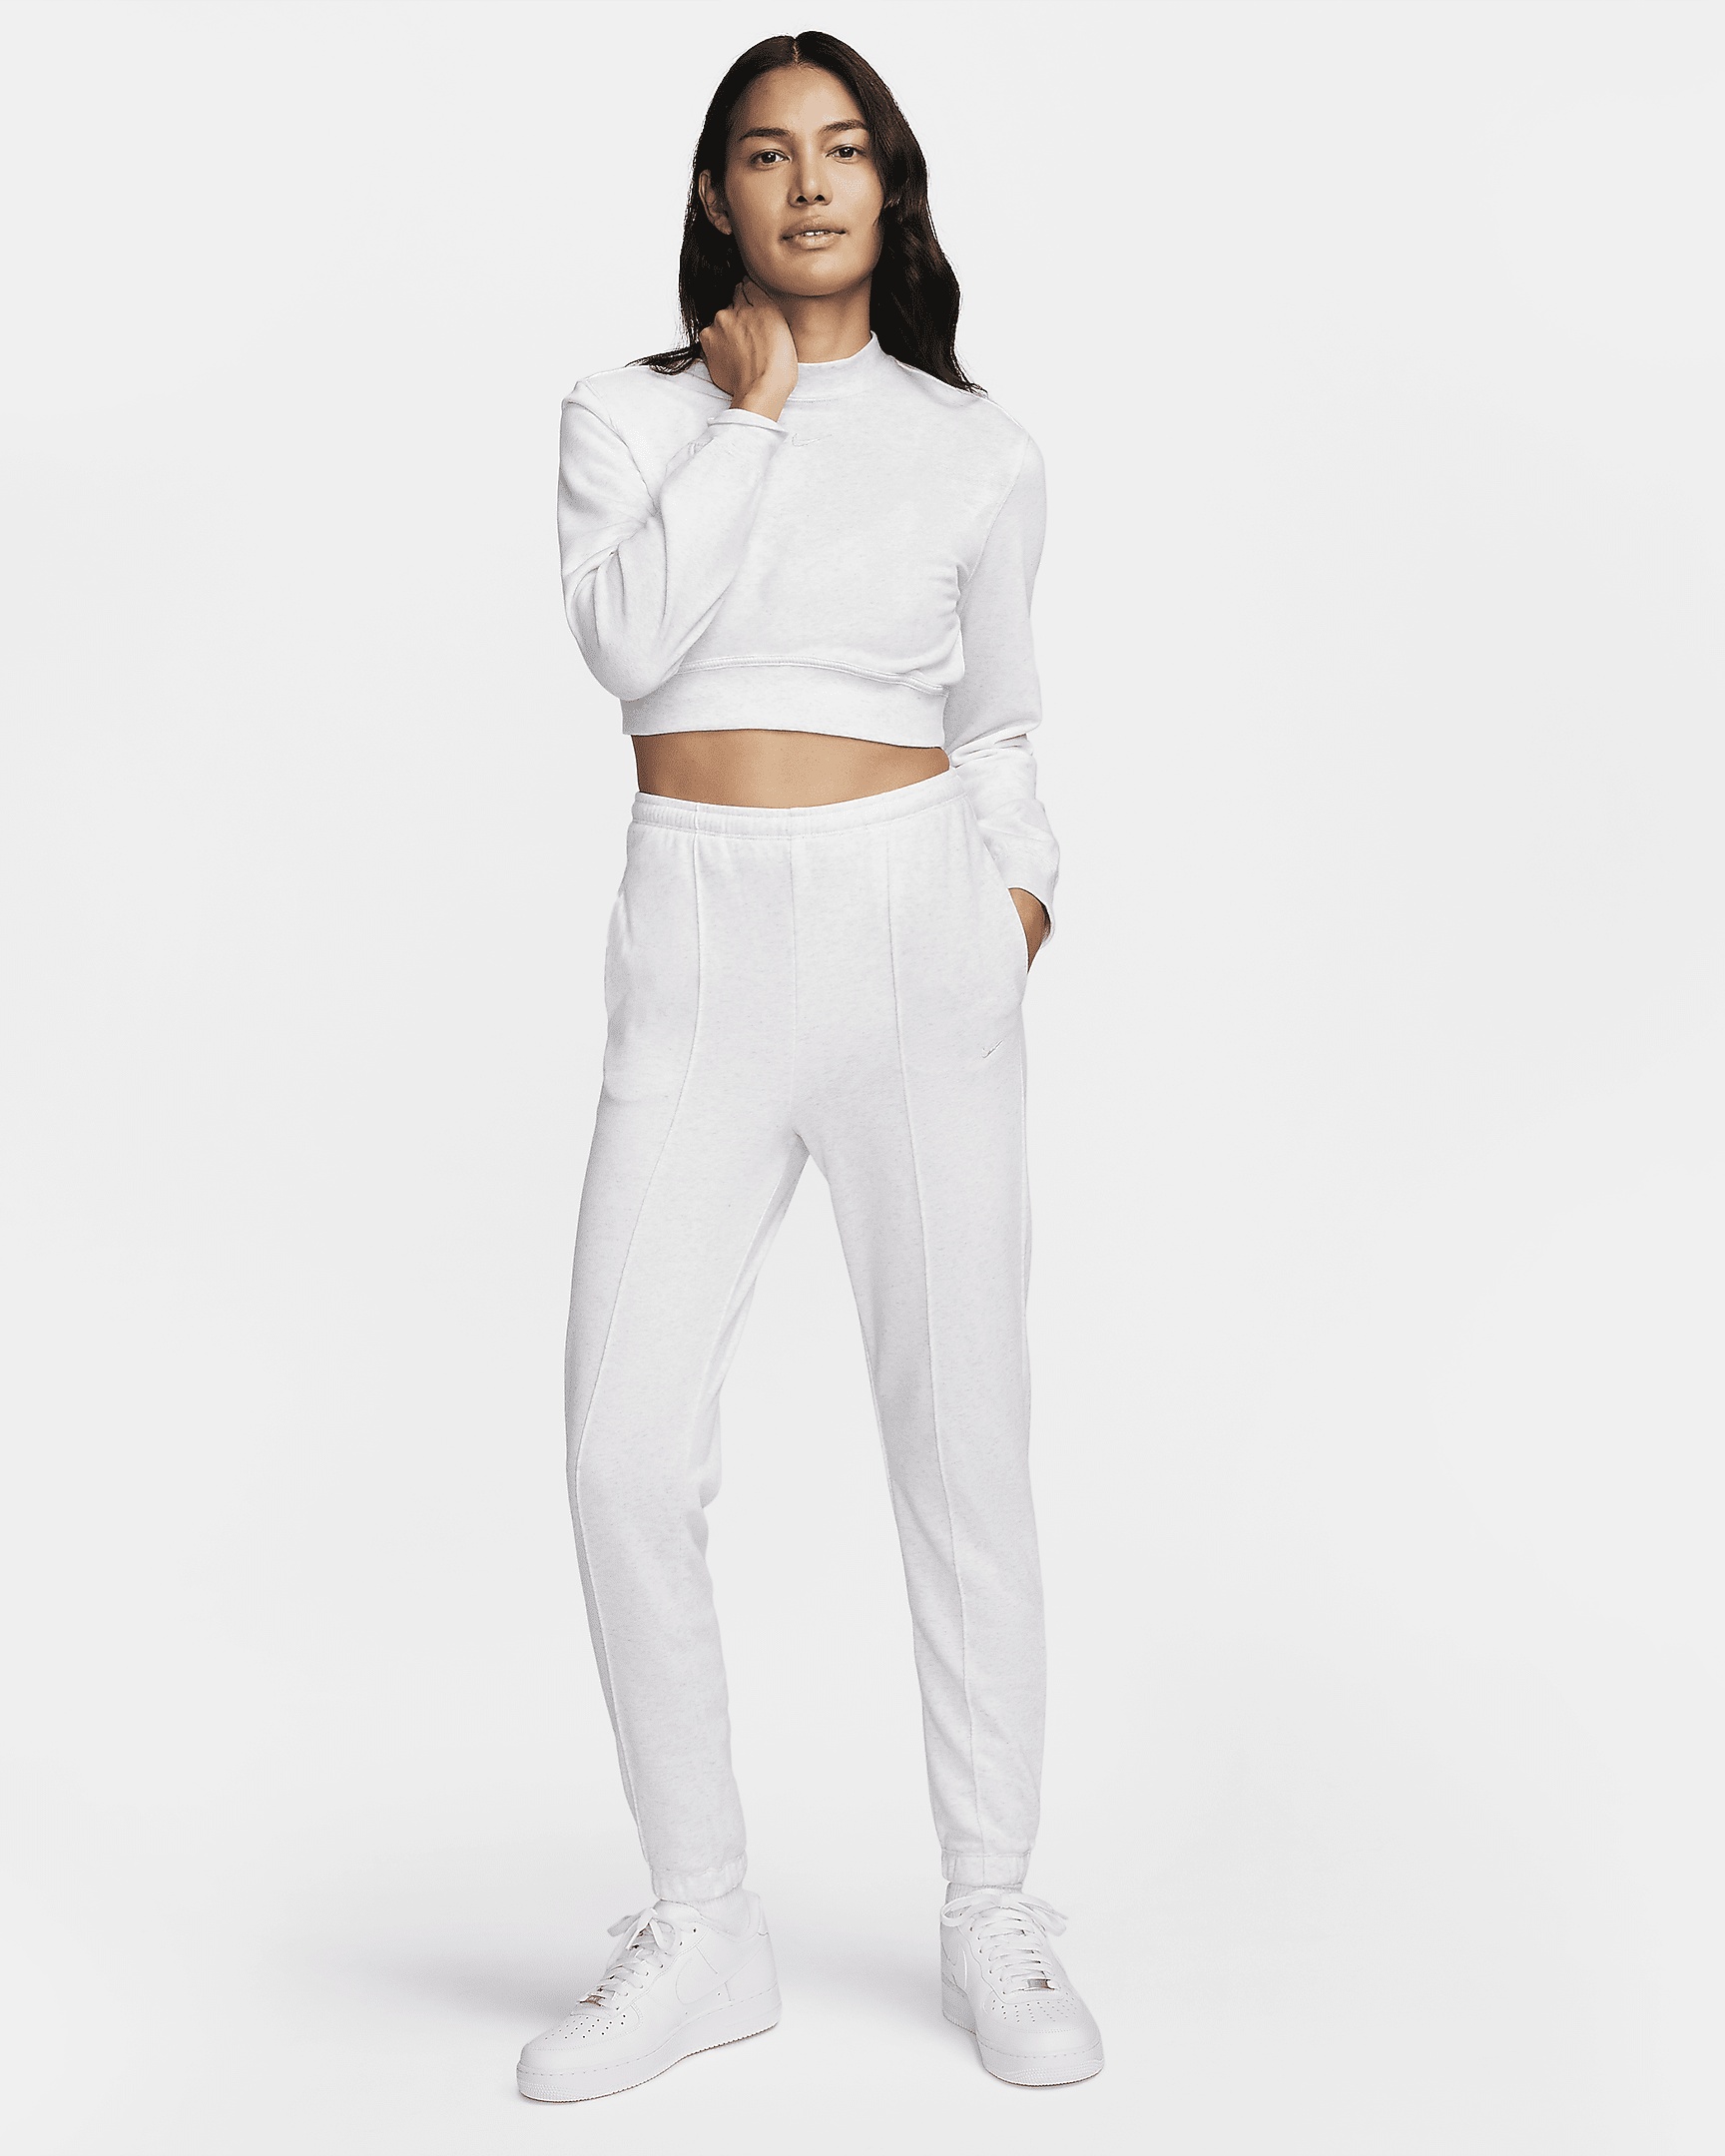 Women's Nike Sportswear Chill Terry Slim High-Waisted French Terry Sweatpants - 9